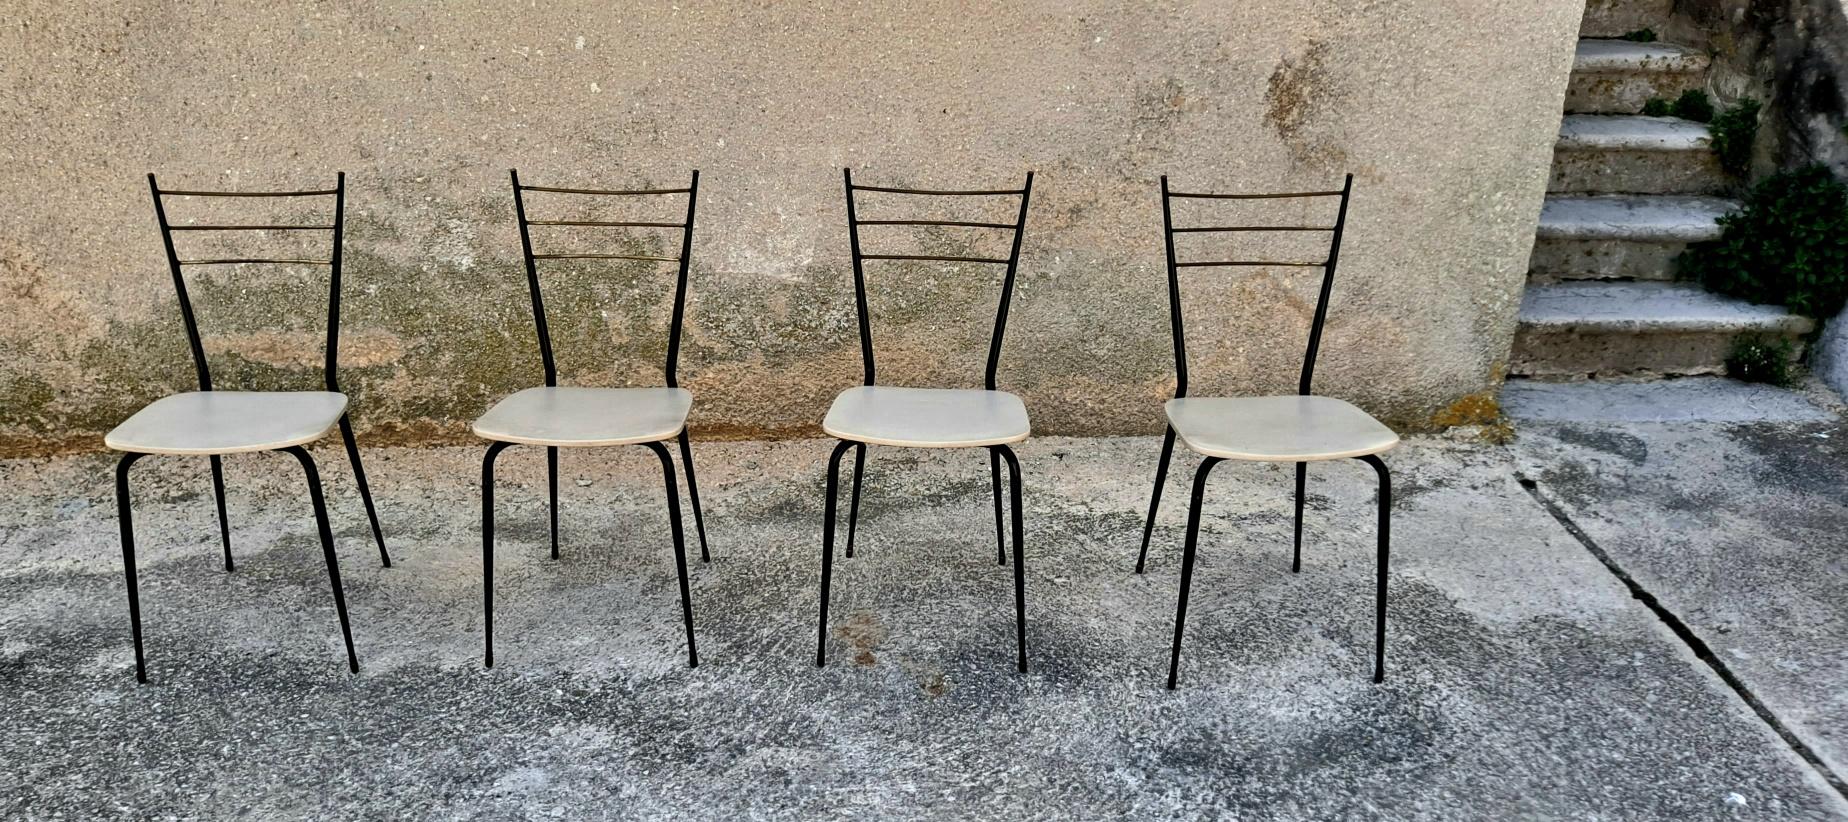  Italian Ding Room Chairs Attributed to Ico Parisi and Paolo di Poli  For Sale 2